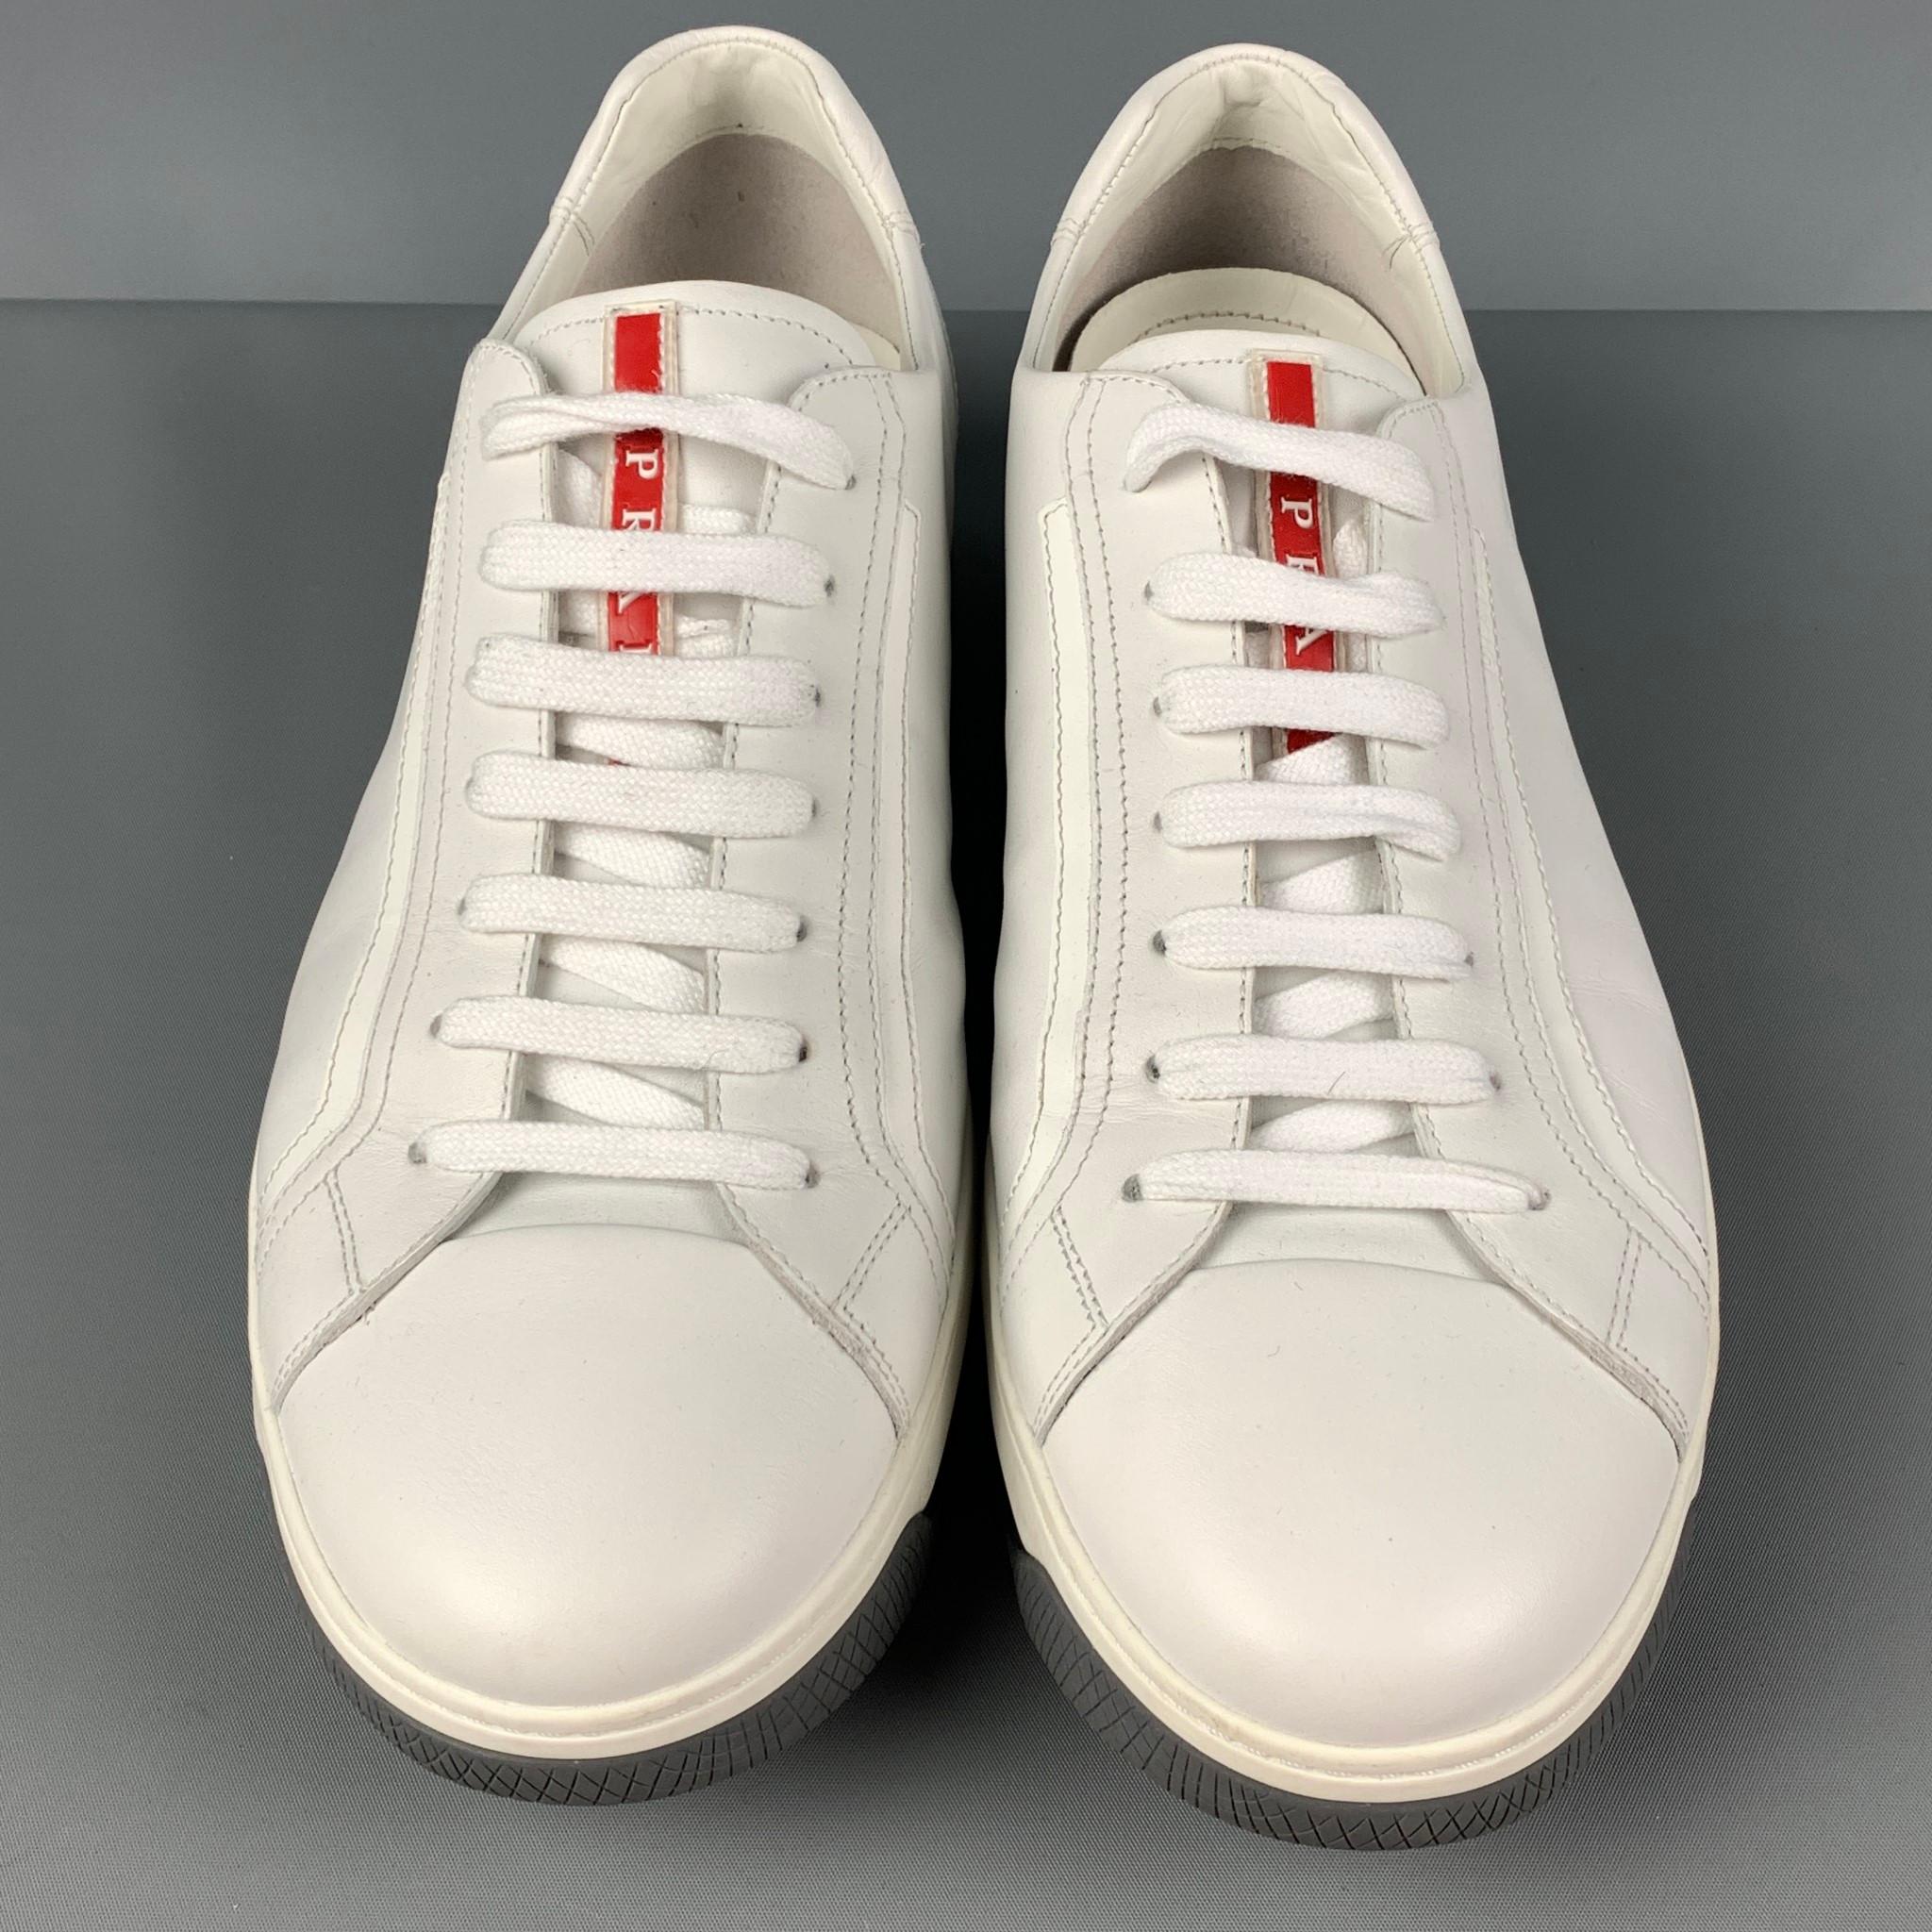 Men's PRADA Size 11.5 White Leather Lace Up Sneakers